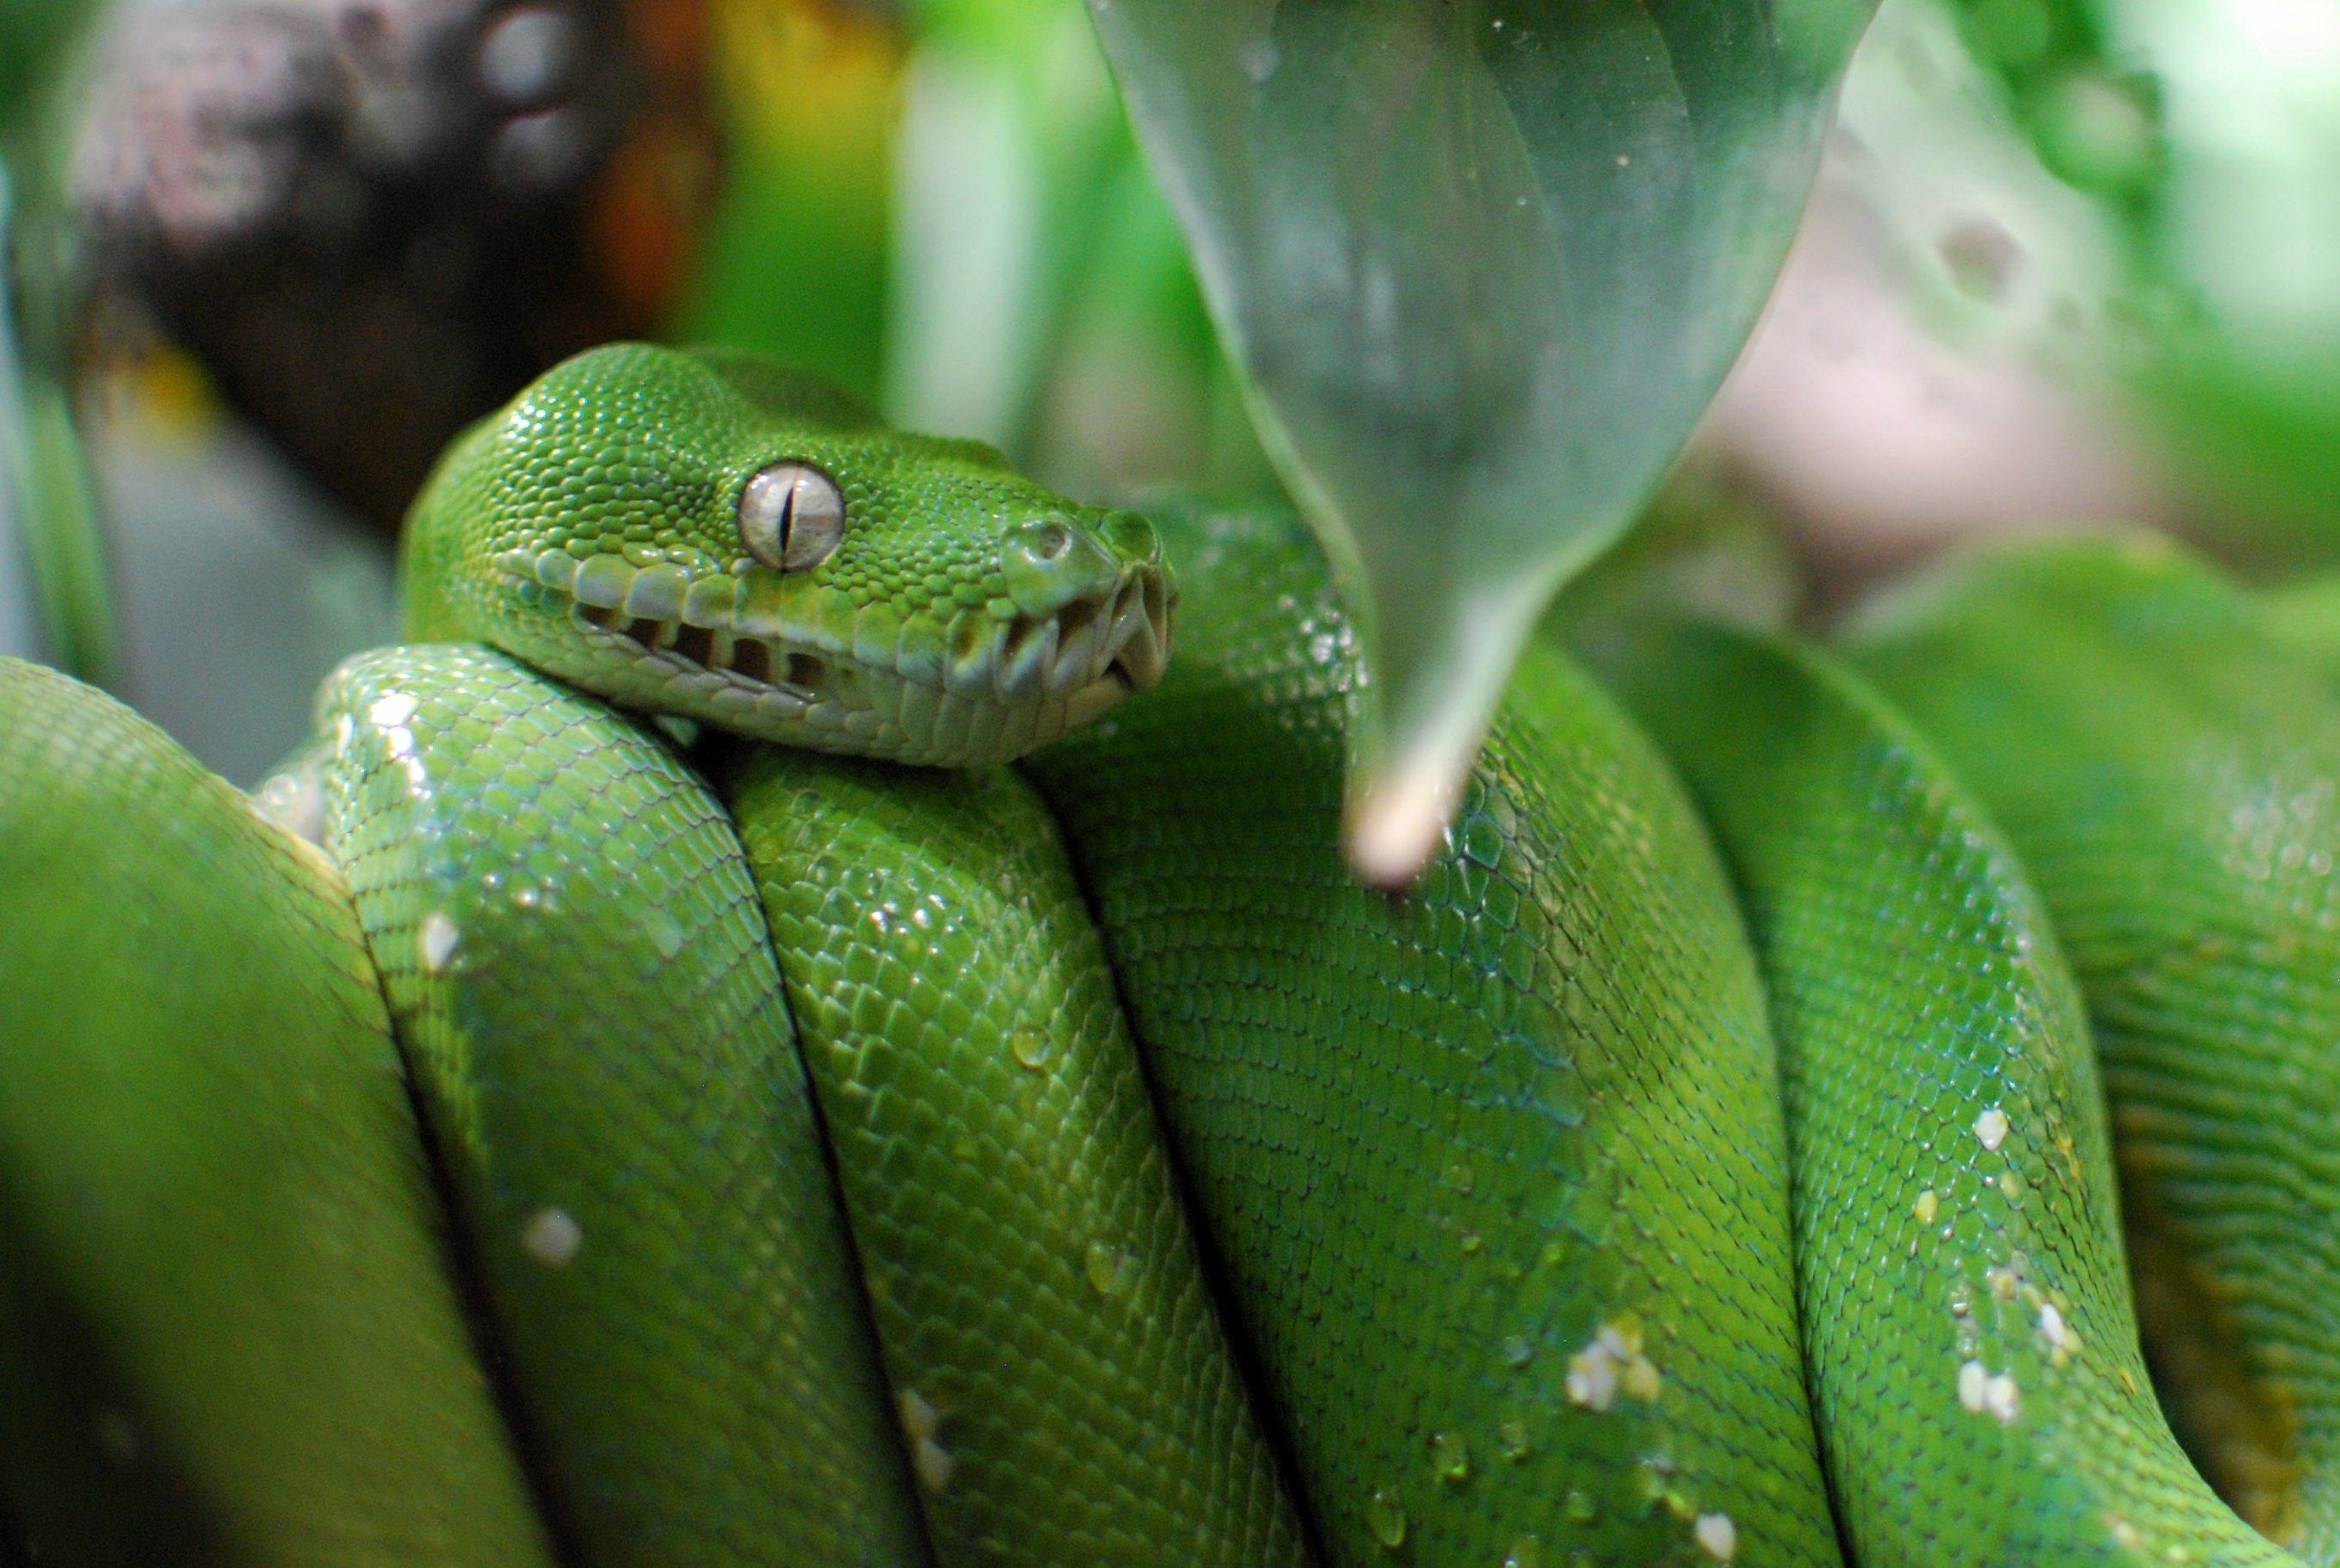 A green tree python from the Ménagerie du Jardin des Plantes zoo in Paris (own work, CC-BY-SA 4.0)